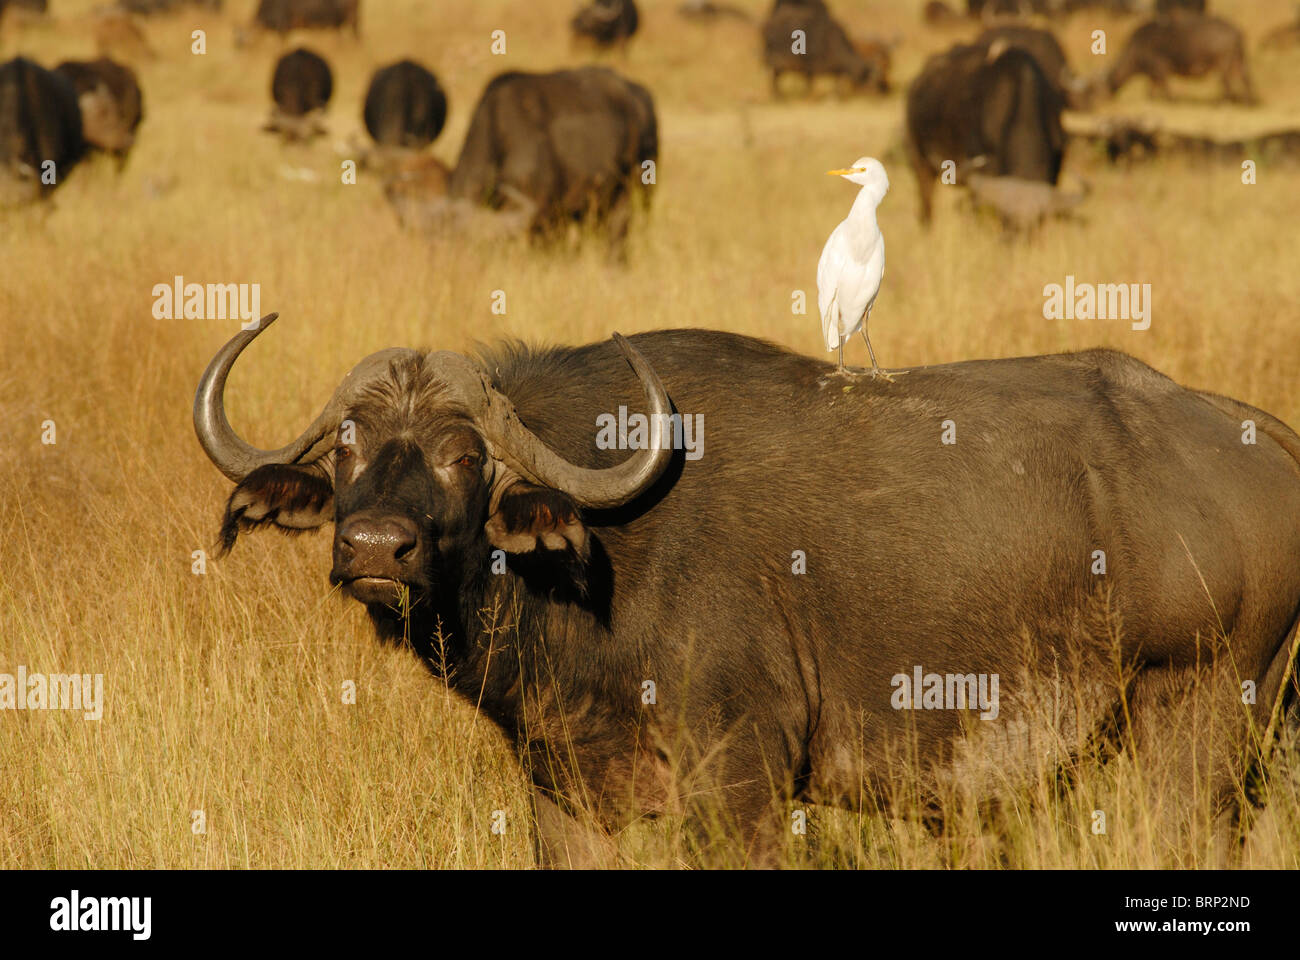 Cape buffalo wit cattle egret perched on its back Stock Photo